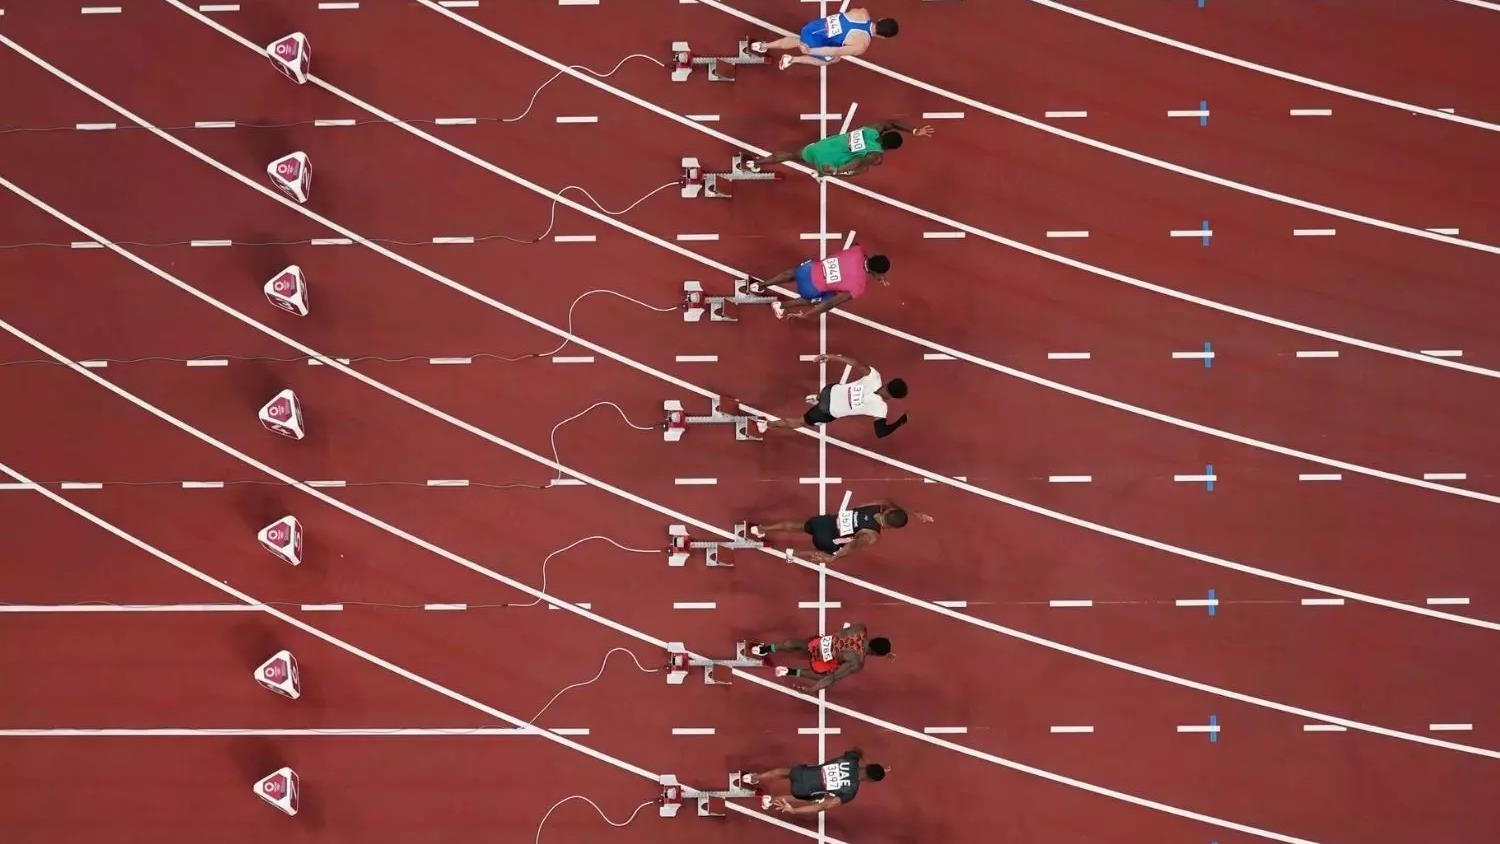 Overhead view of athletes in starting blocks on a track, preparing for the fastest 100 meters. Marked lanes and starting lines are visible.